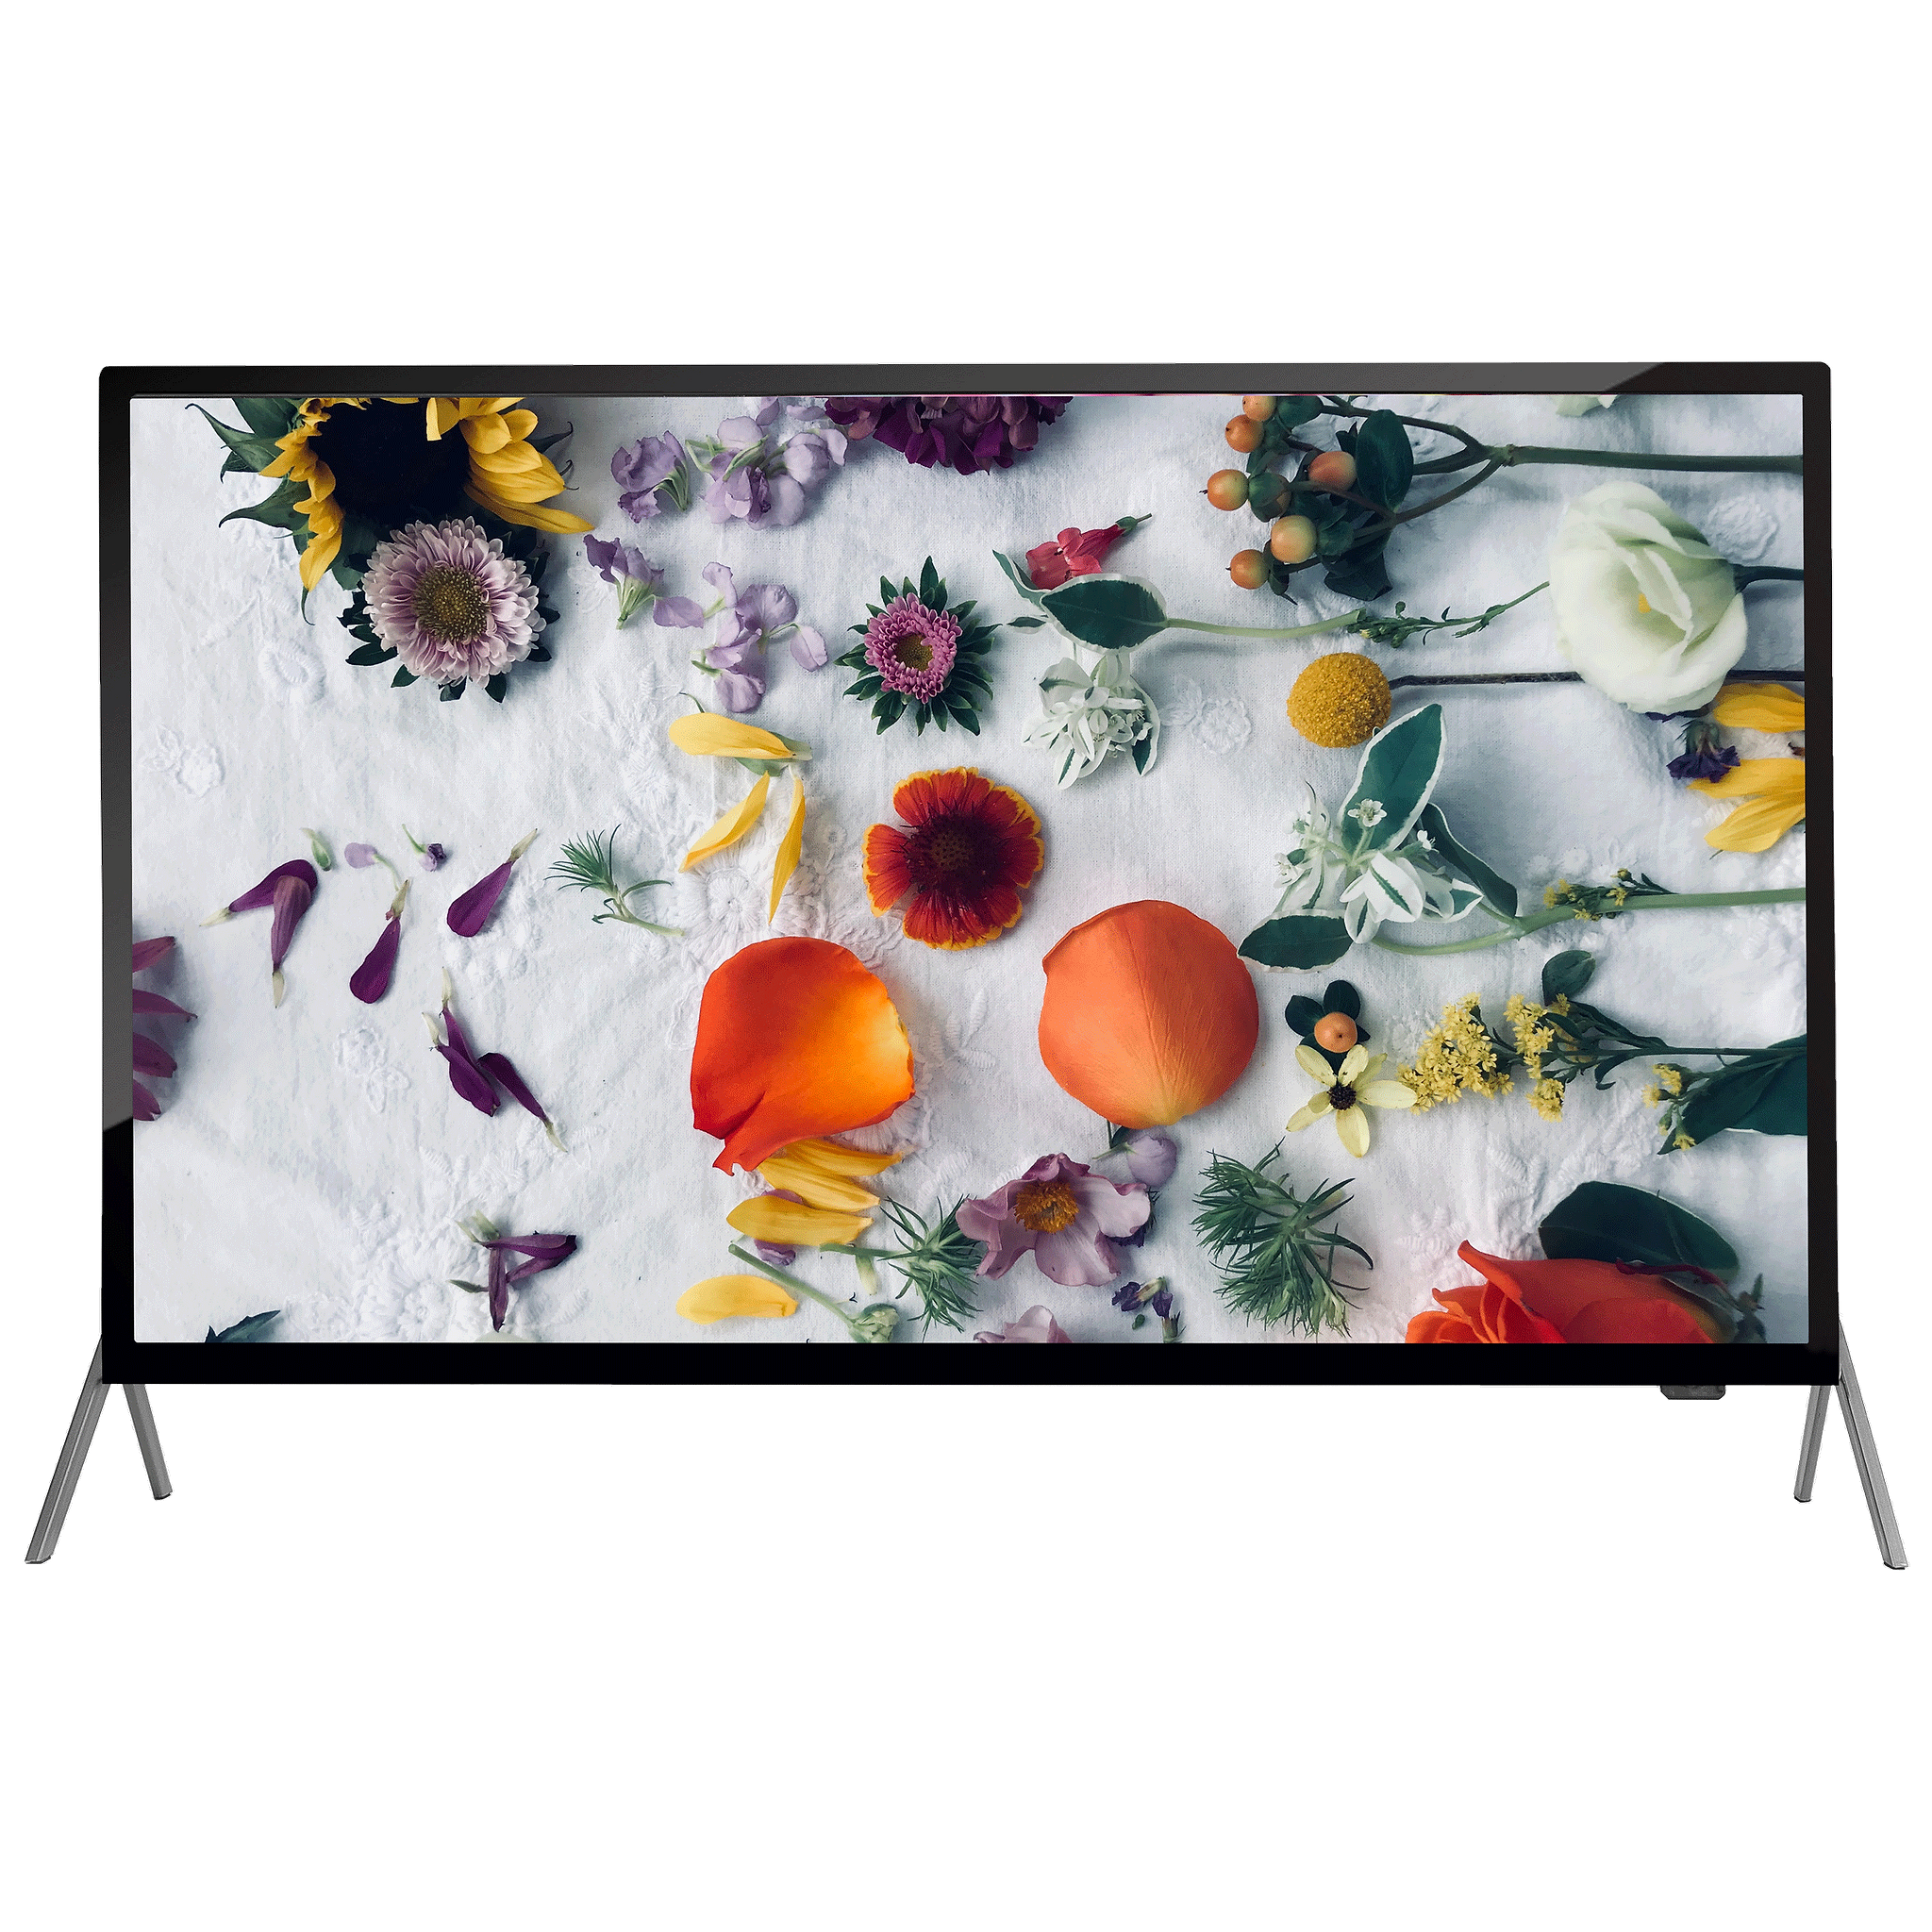 Croma Retail - Treeview Magma 98cm (40 Inches) HD Ready Flat Panel Android Smart TV (One Touch Access, IND3802ST, Black)